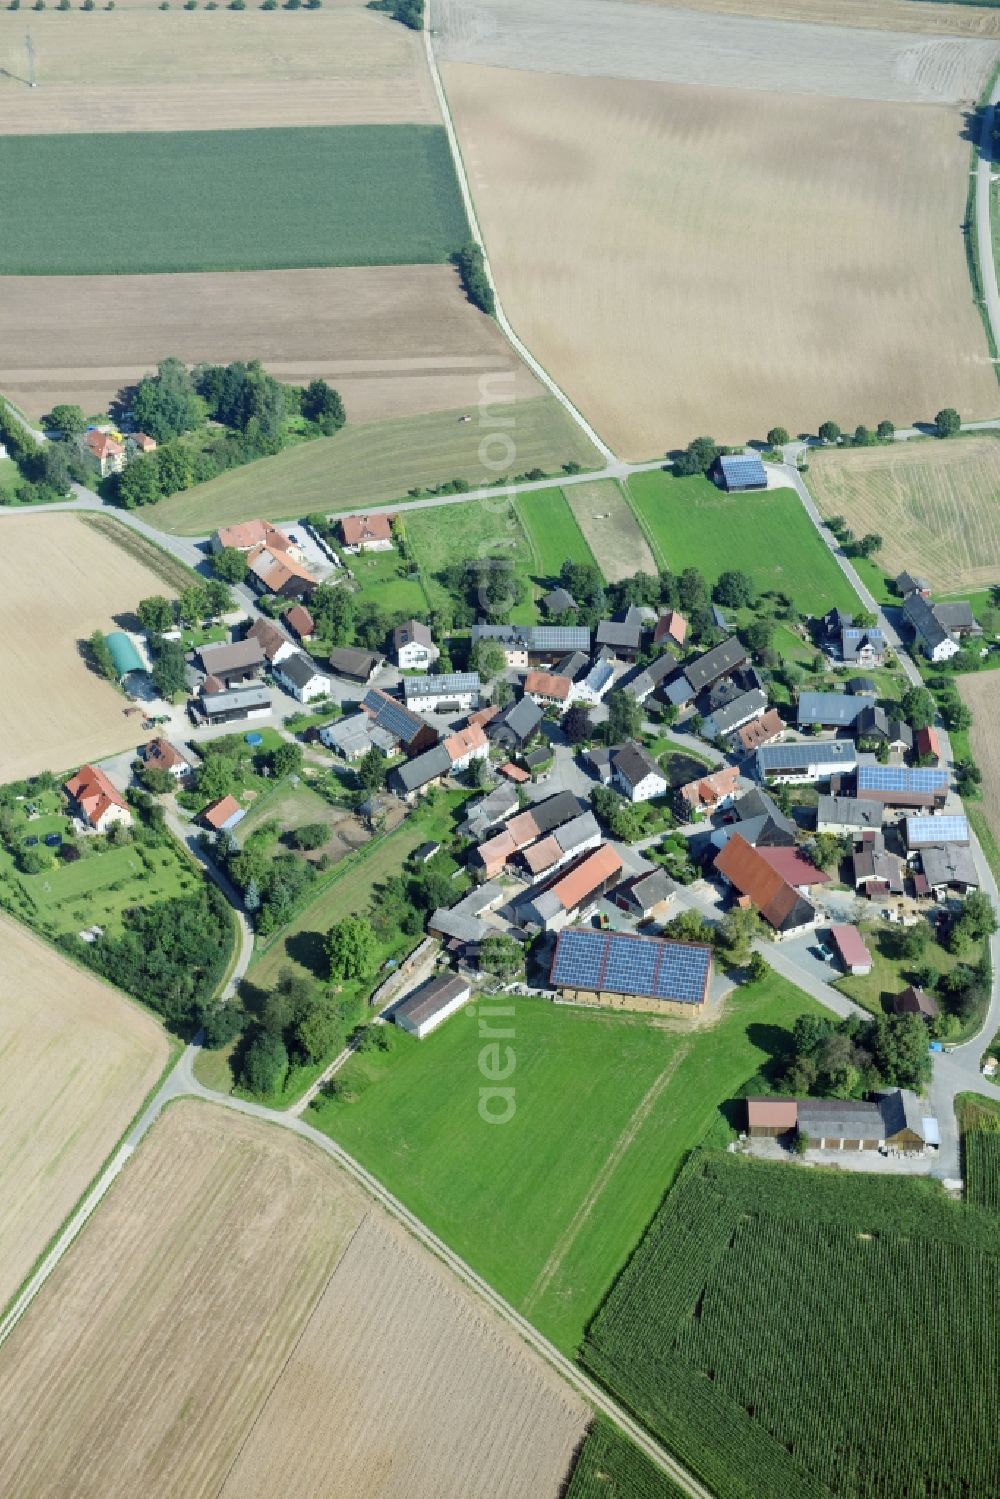 Feulersdorf from above - Village - view on the edge of agricultural fields and farmland in Feulersdorf in the state Bavaria, Germany